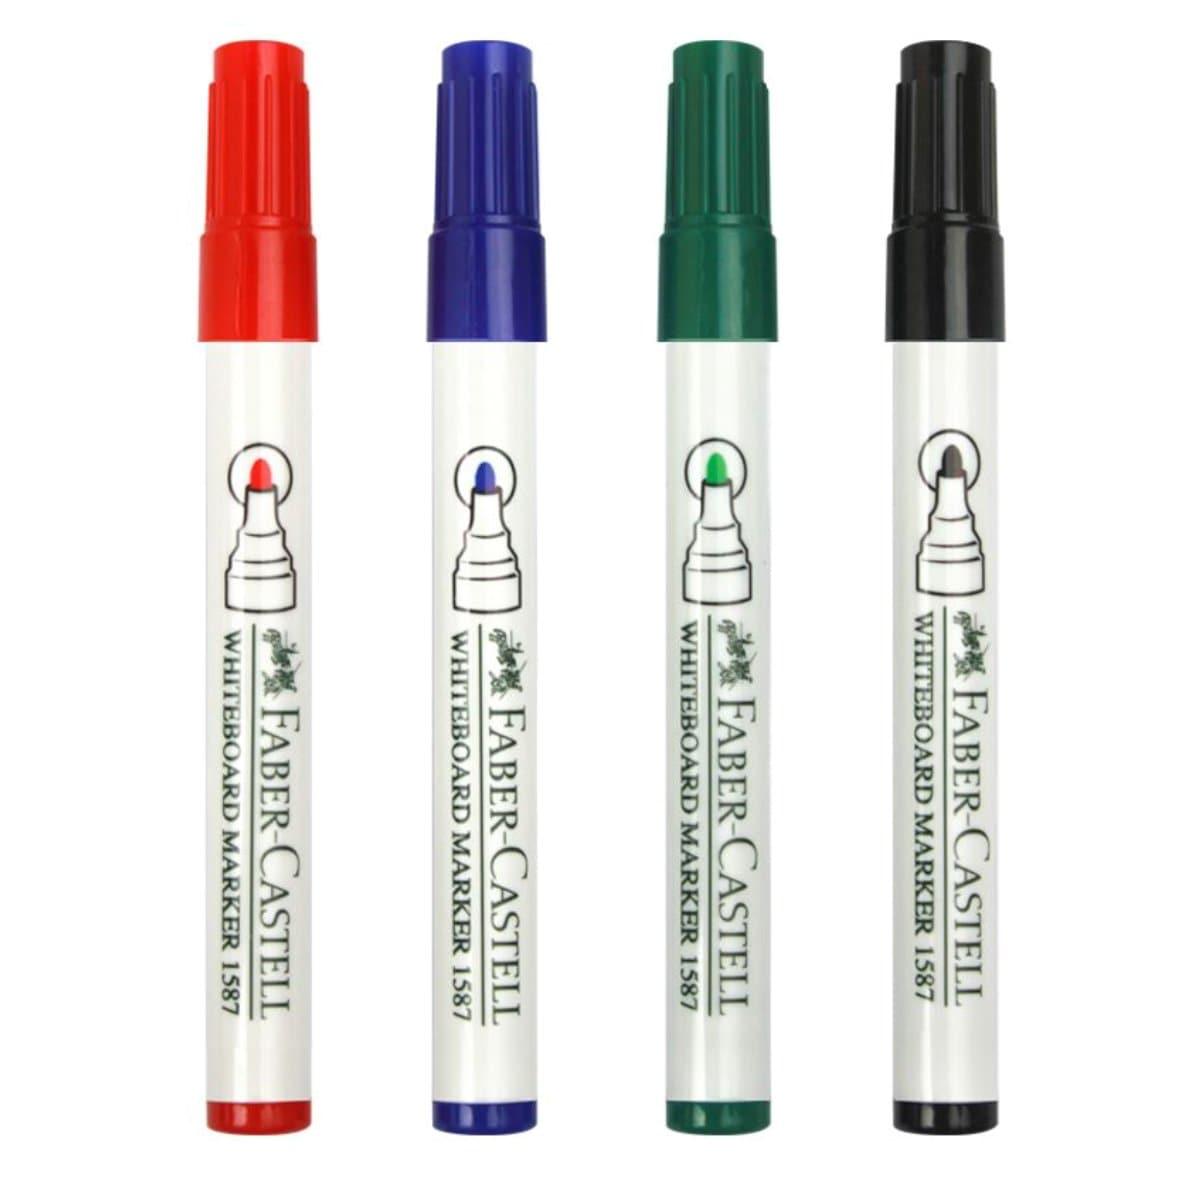 Faber Castell Whiteboard Marker Round Tip Set OF 4 pcs / 500428 - Karout Online -Karout Online Shopping In lebanon - Karout Express Delivery 